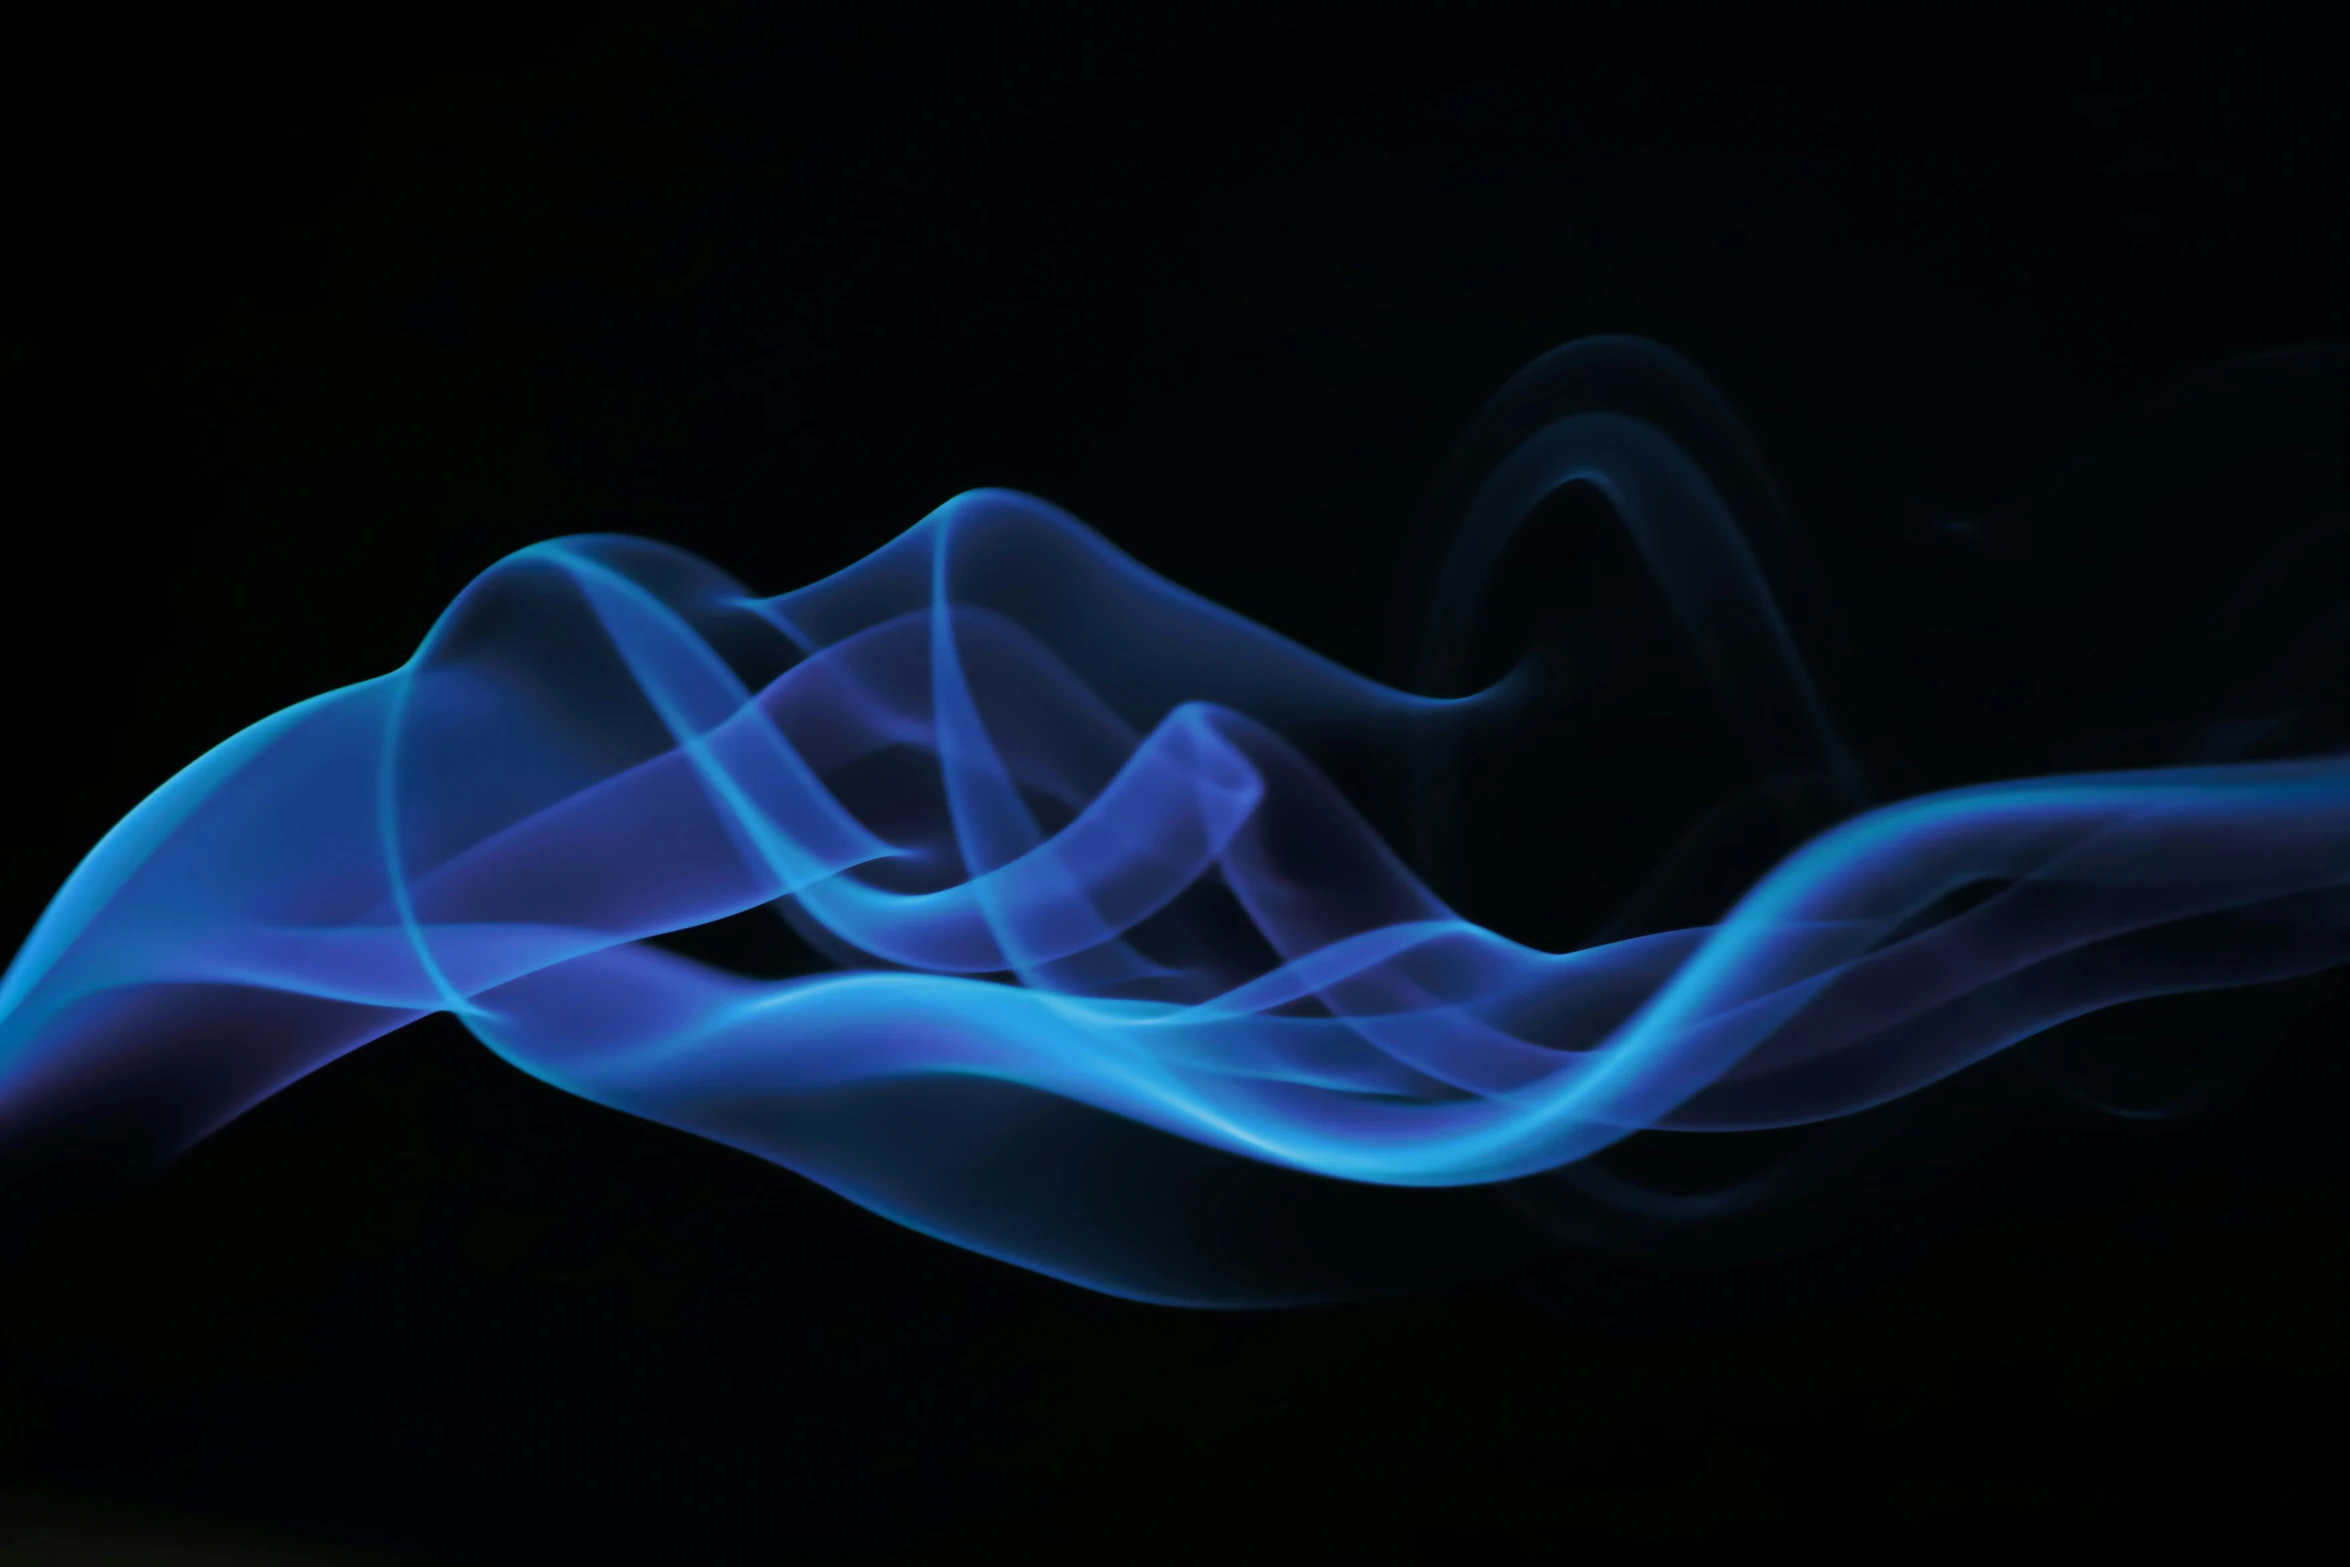 the smoke is blue and the black background has some waves in it